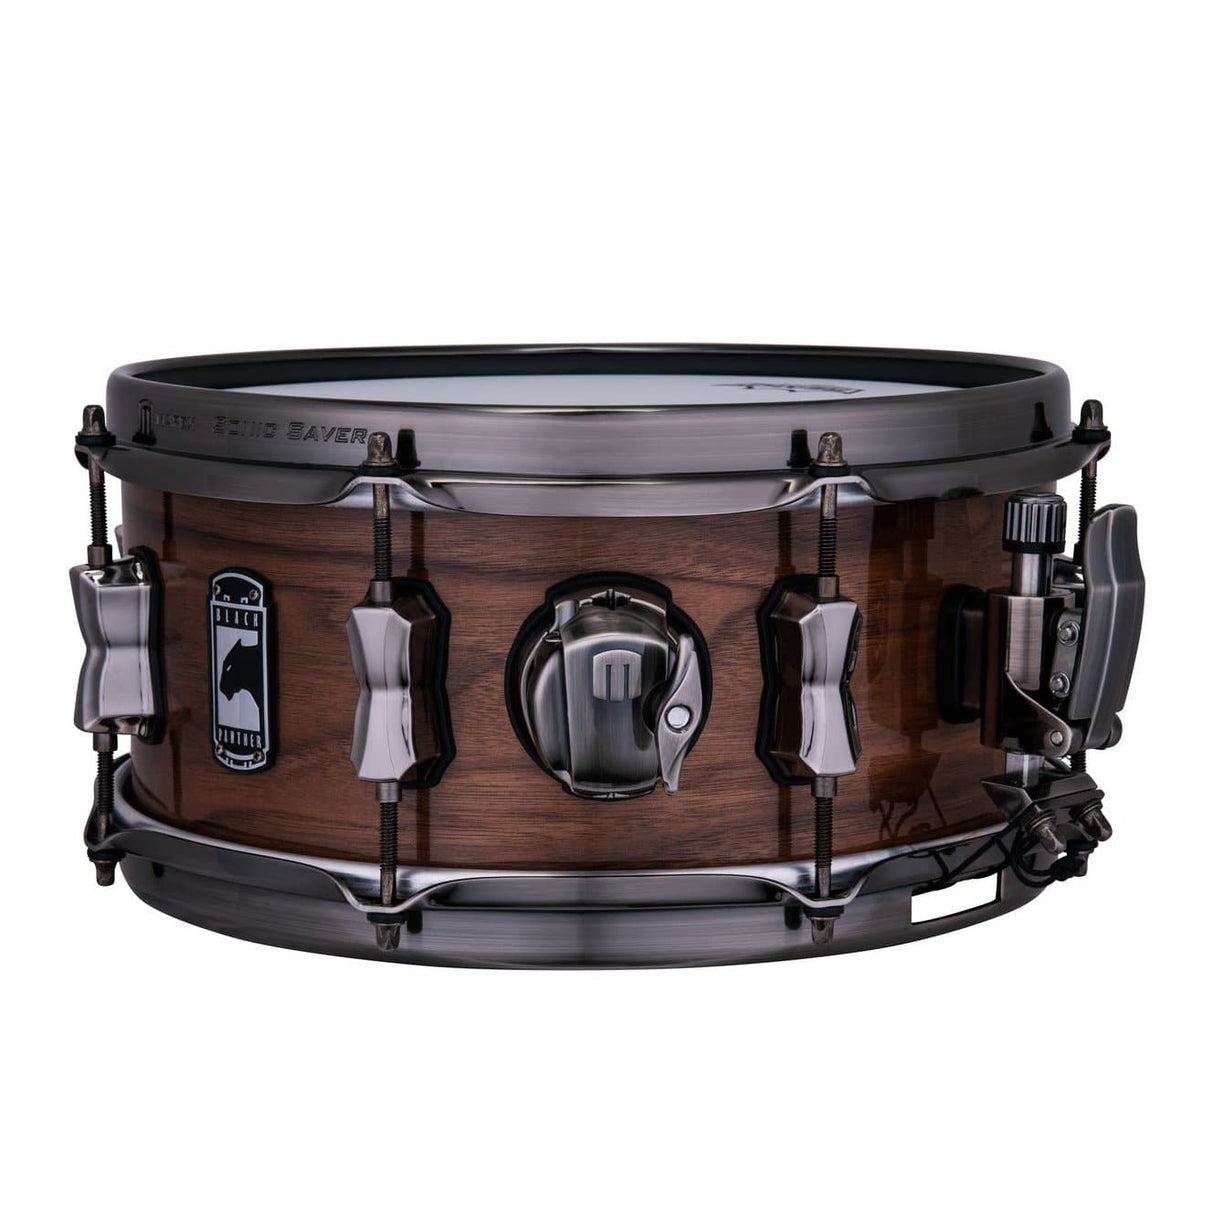 Mapex Black Panther Goblin Snare Drum 12x5.5 Natural Glossy Walnut